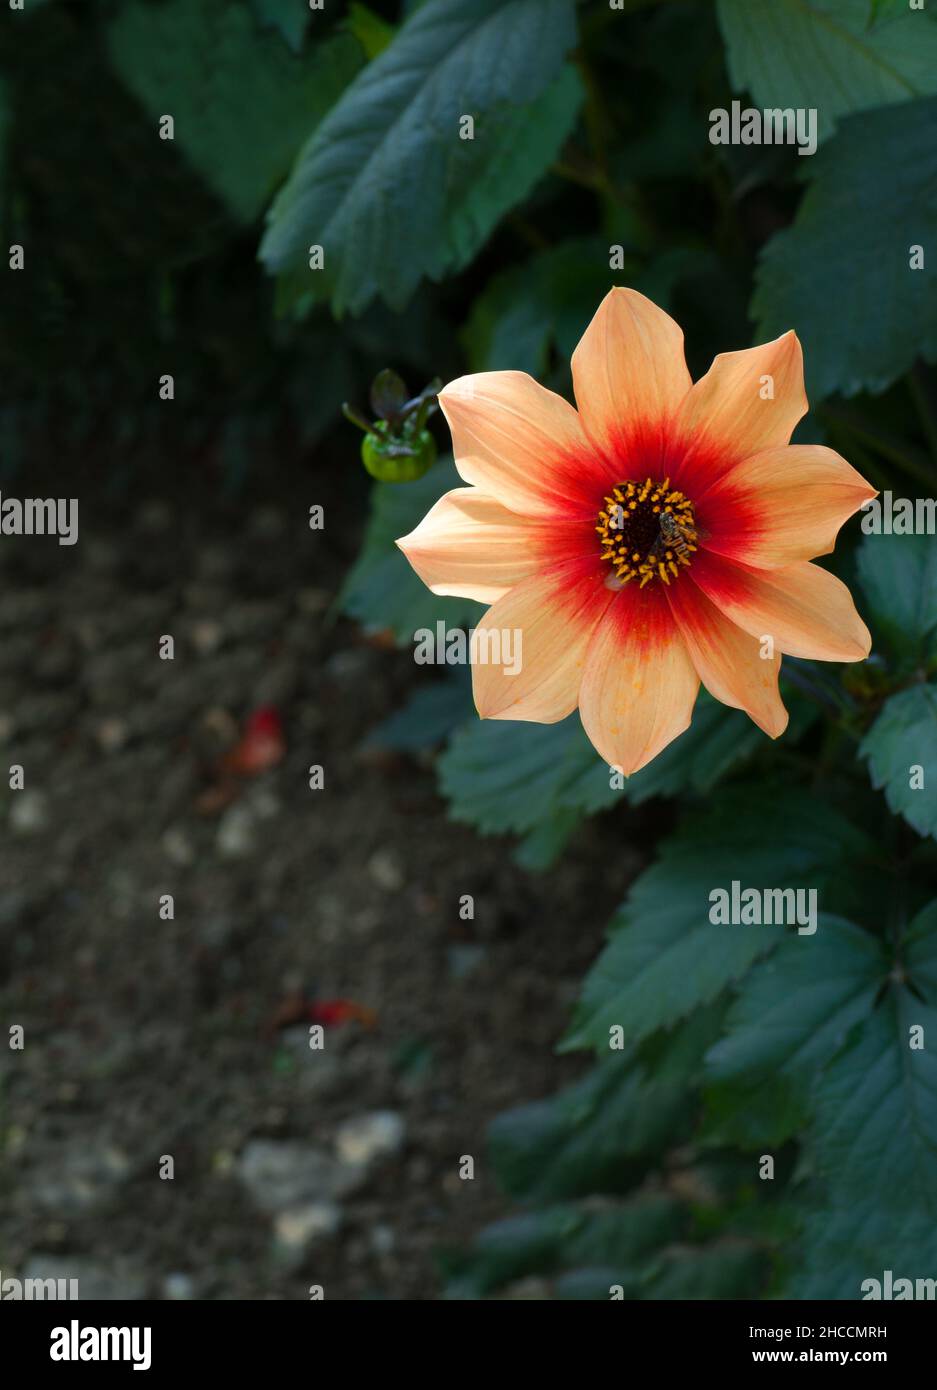 Orange and red single-flowered dahlia 'Bishop of Oxford' Stock Photo